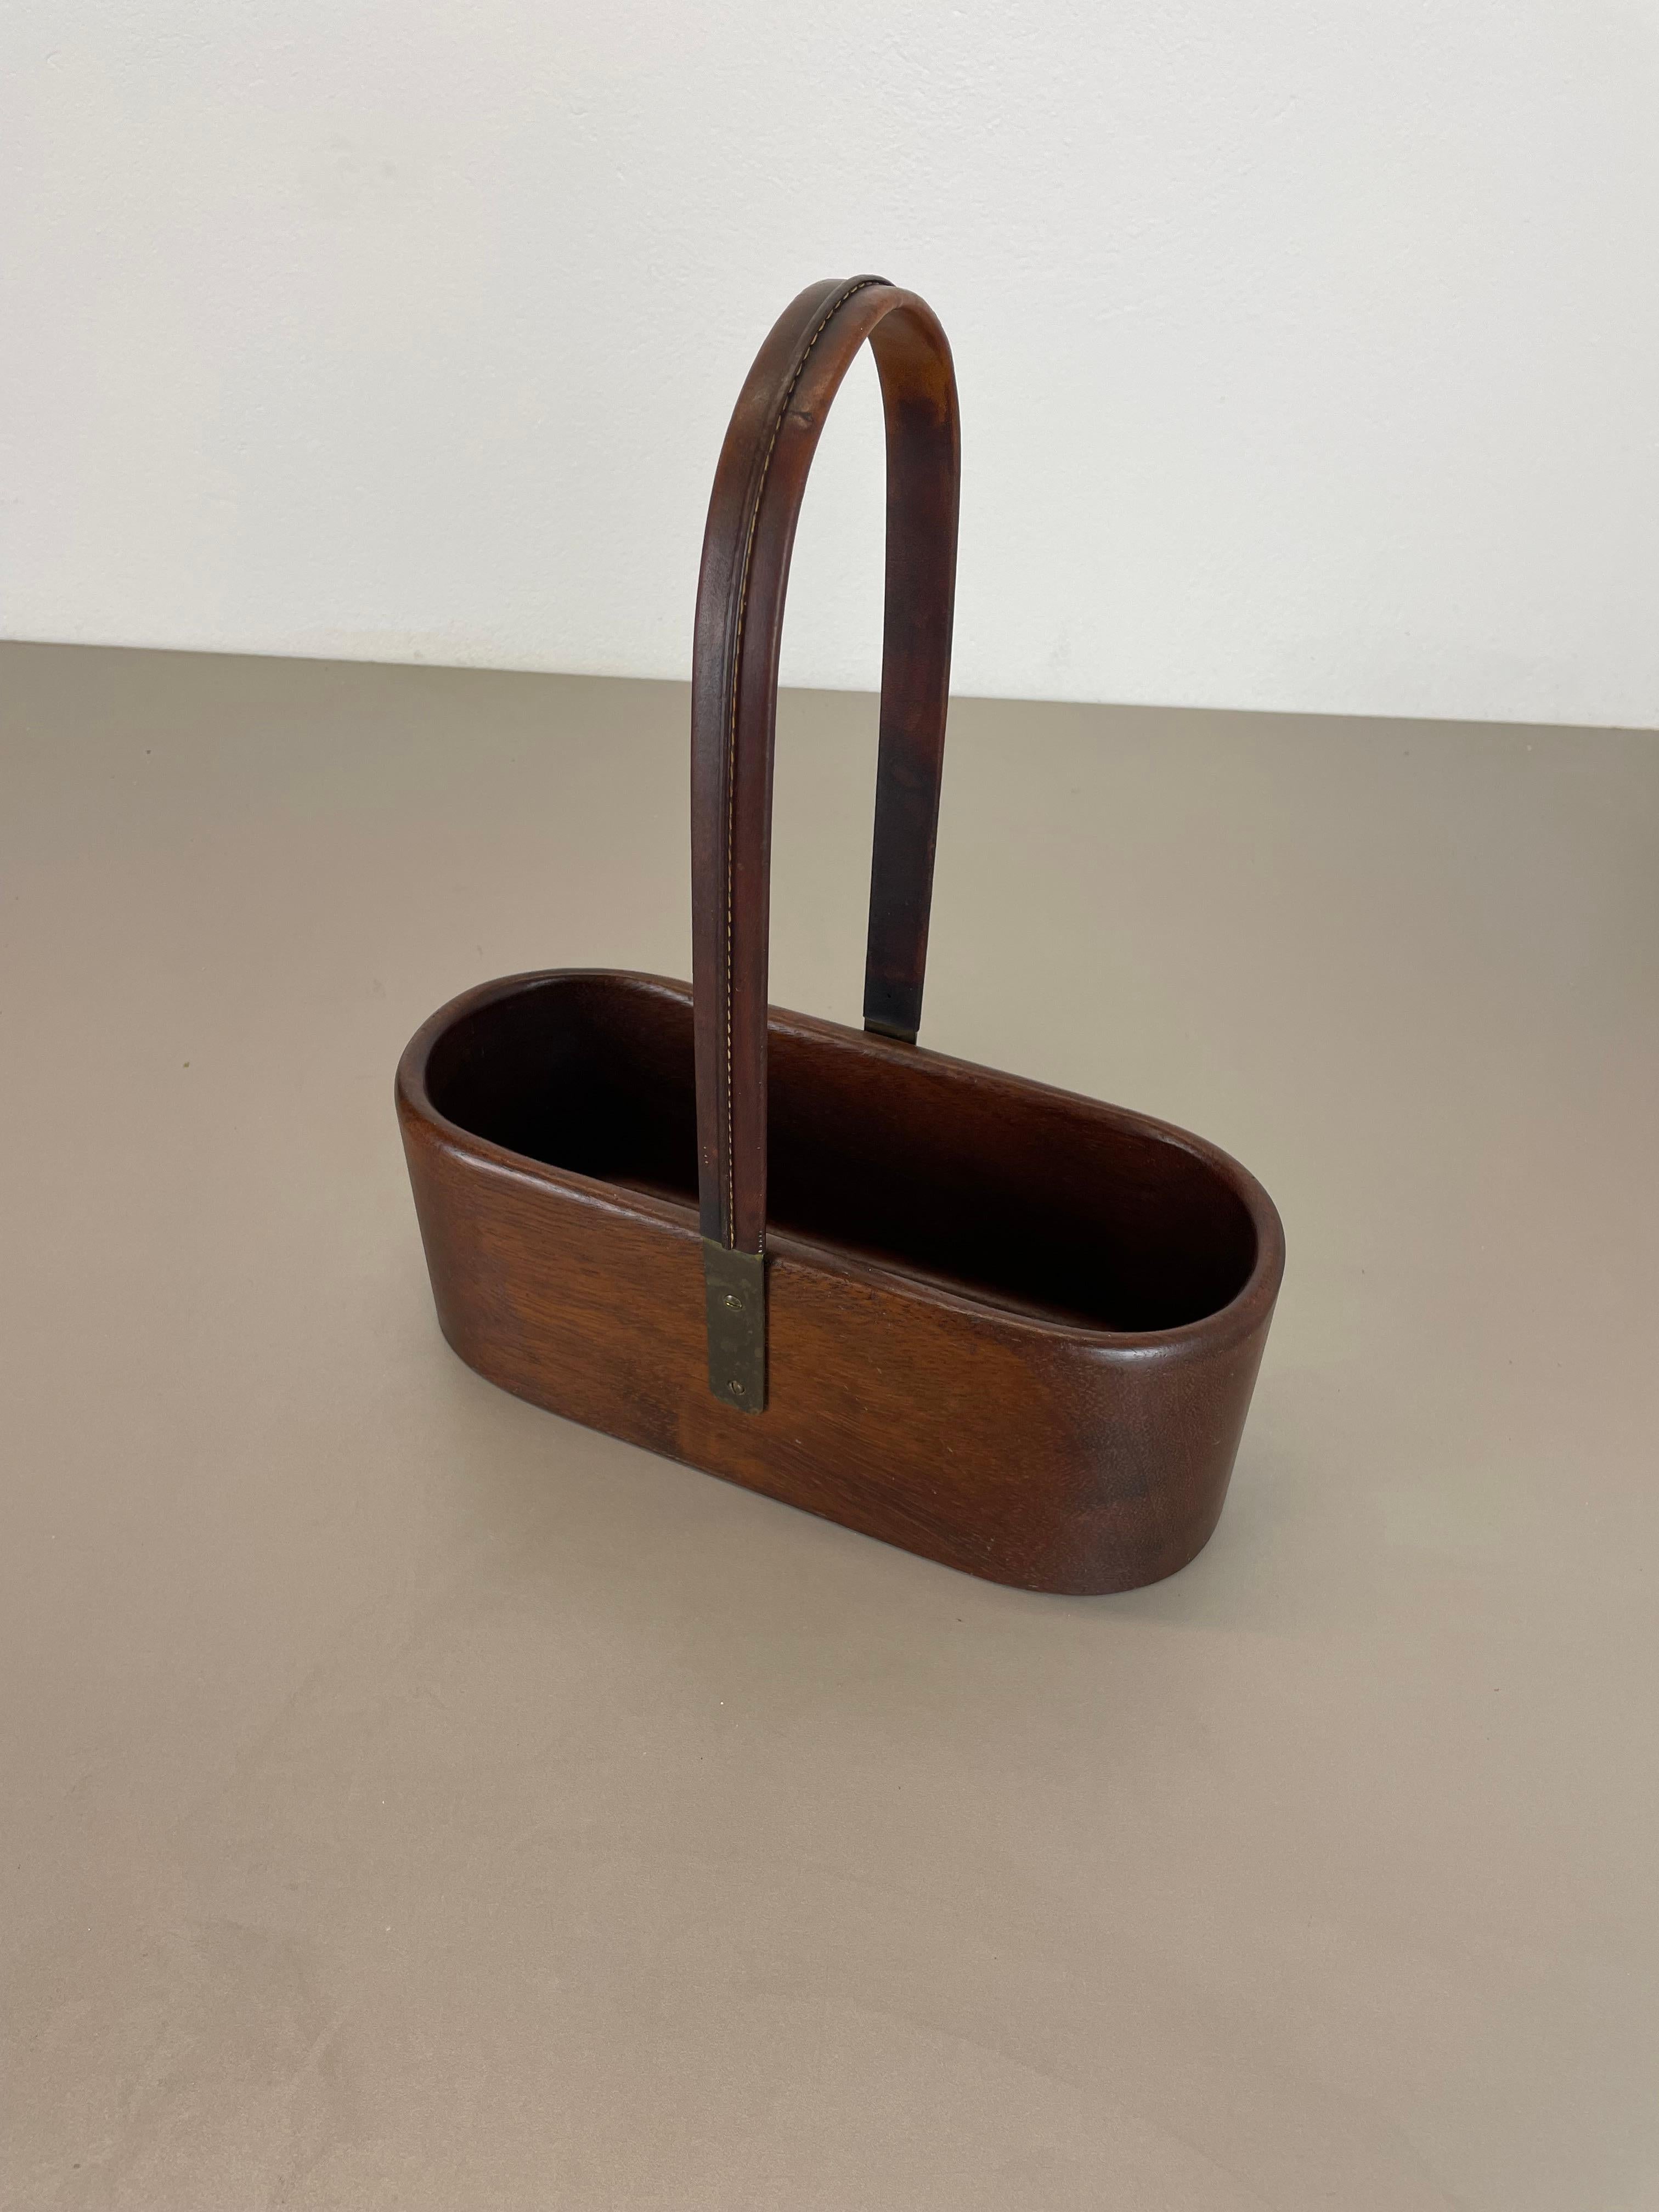 Teak Bottle Holder with Brass and Leather Handle by Carl Auböck, Austria, 1950s For Sale 6